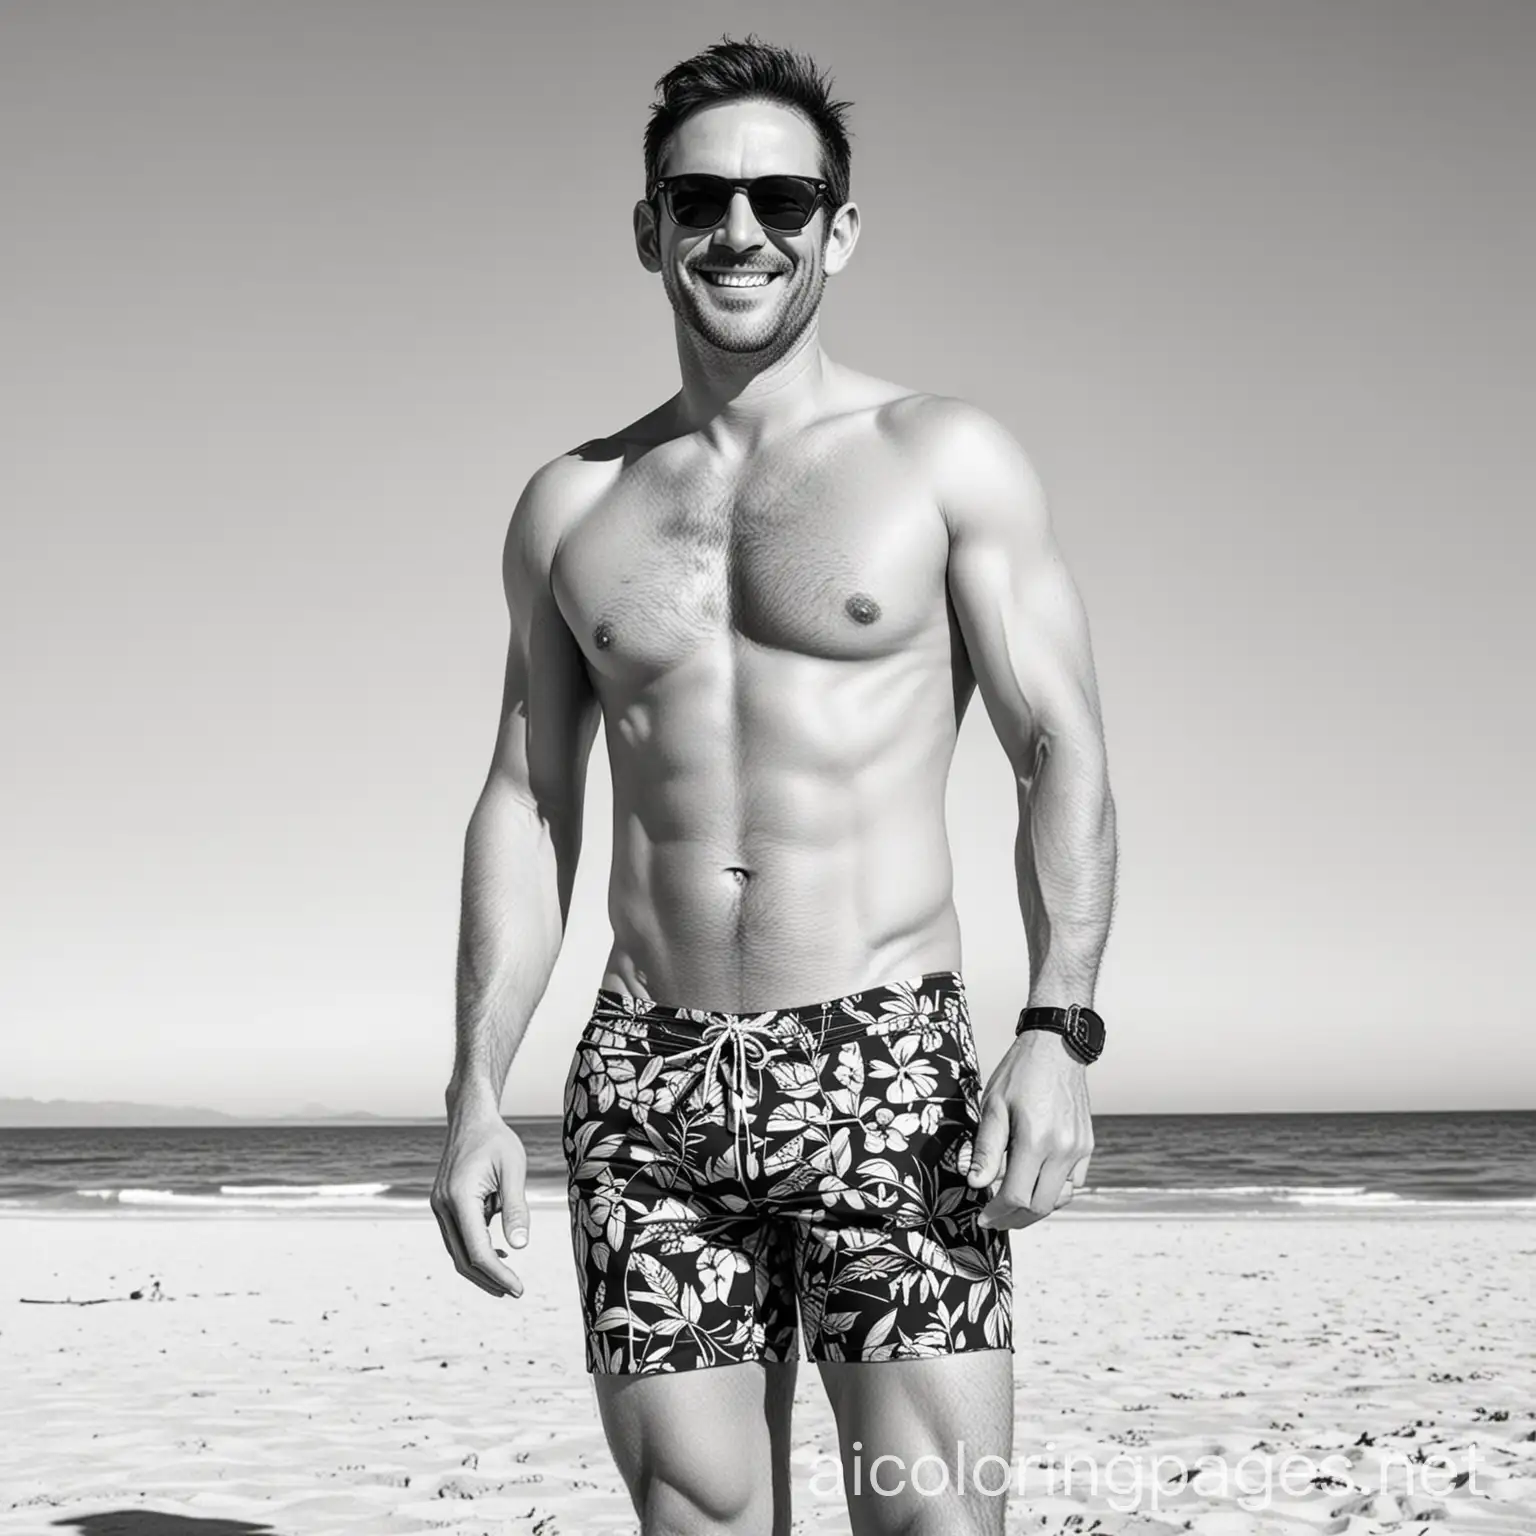 Smiling-Man-in-Swimsuit-on-Beach-Black-and-White-Line-Art